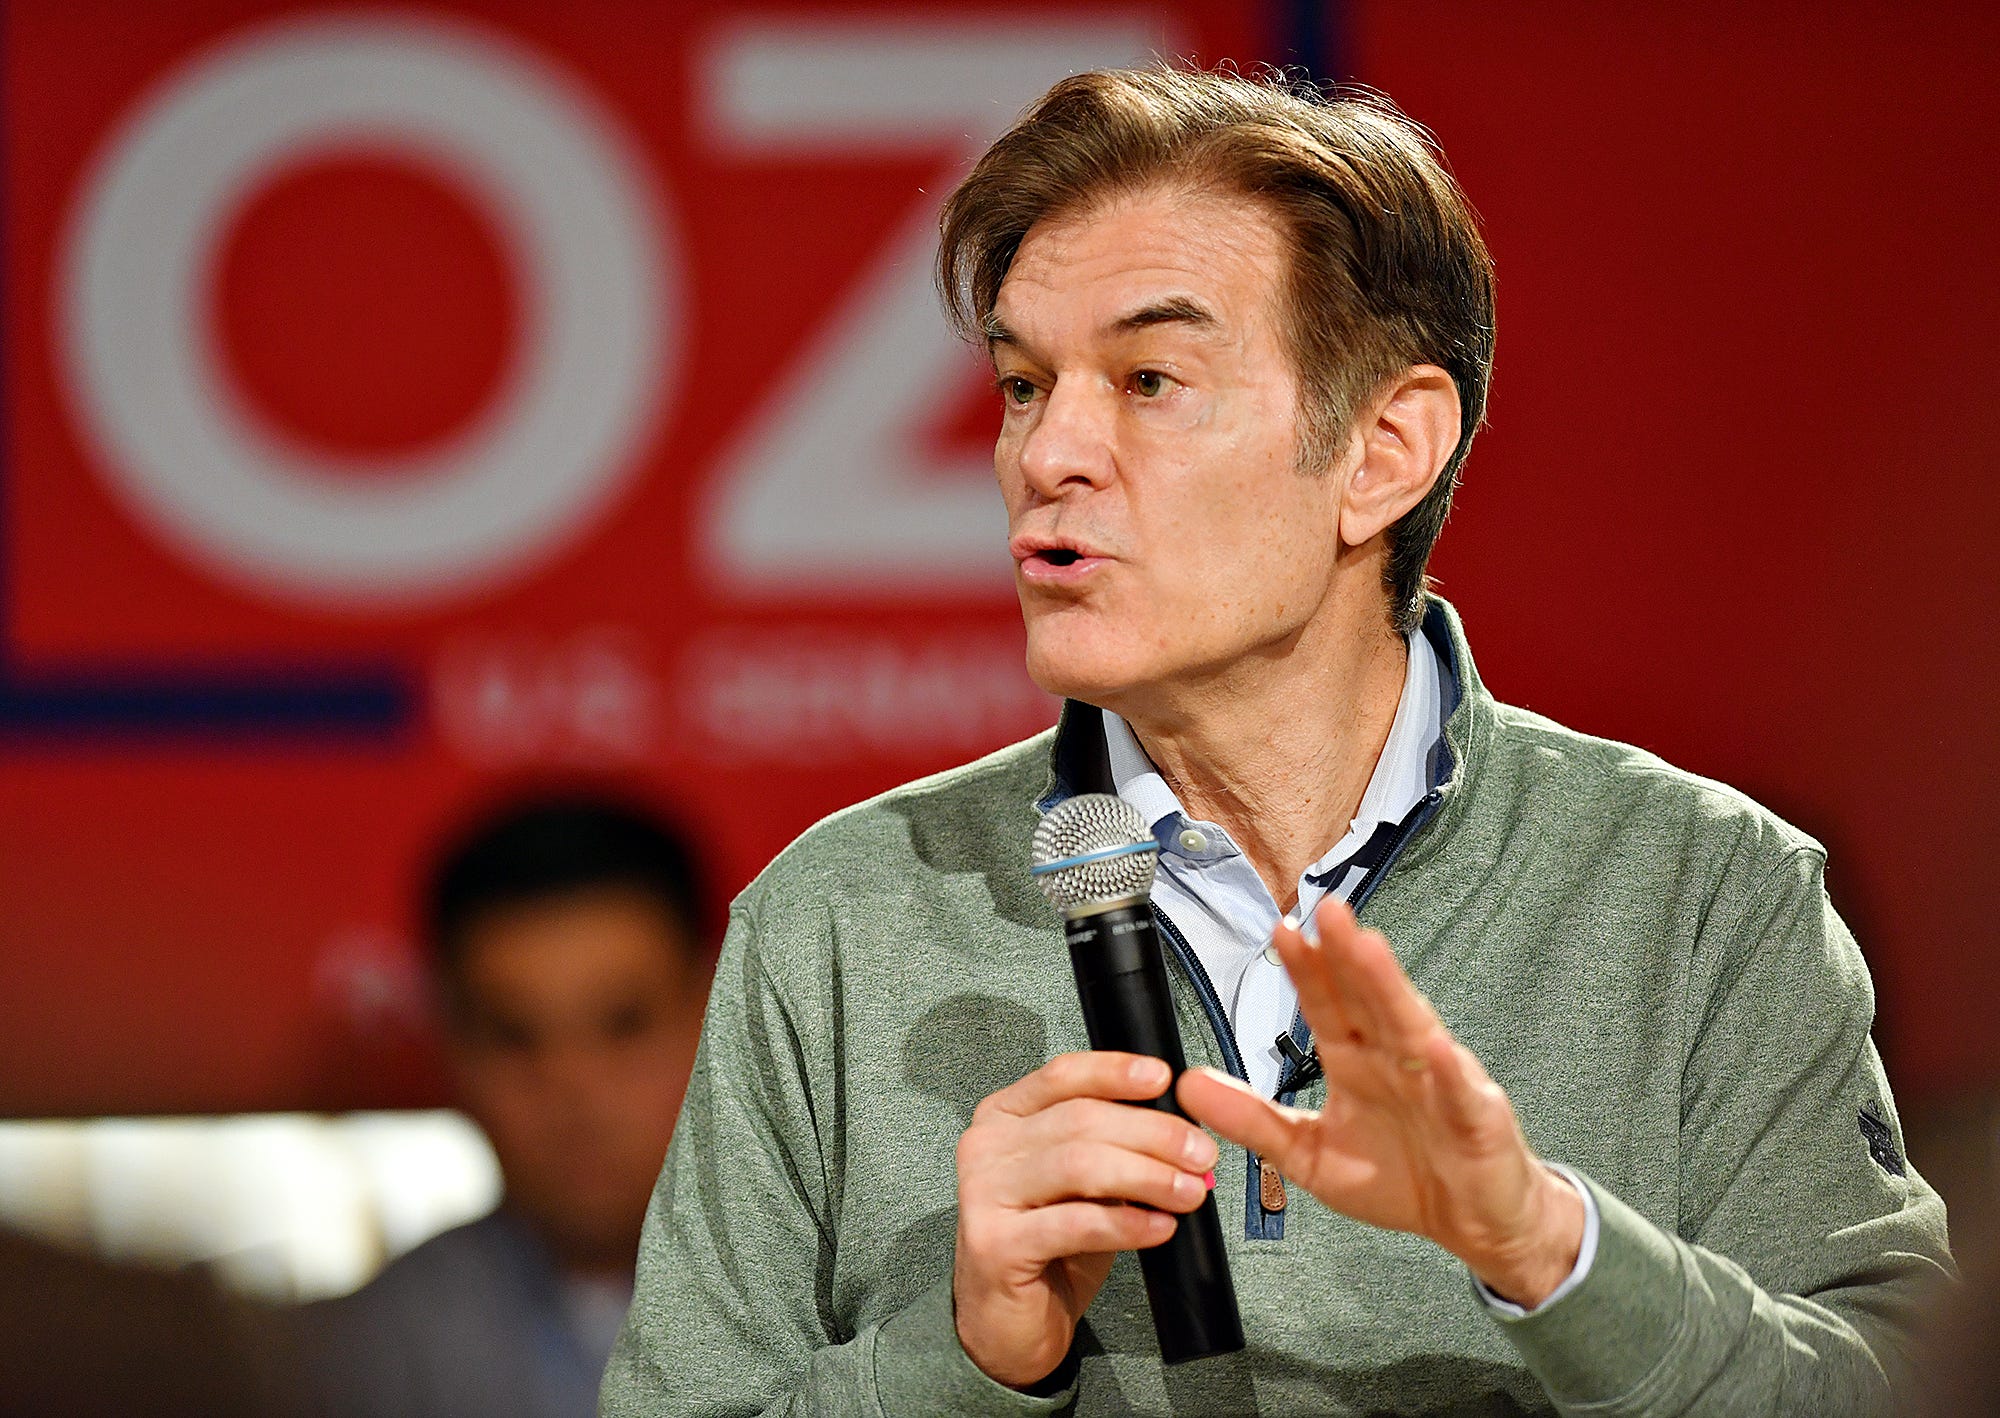 Dr. Mehmet Oz makes the fourth stop along his campaign trail, for the Pennsylvania U.S. Senate seat resigned by U.S. Sen. Pat Toomey, at Wisehaven Event Center in Windsor Township, Saturday, Feb. 5, 2022. Dawn J. Sagert photo